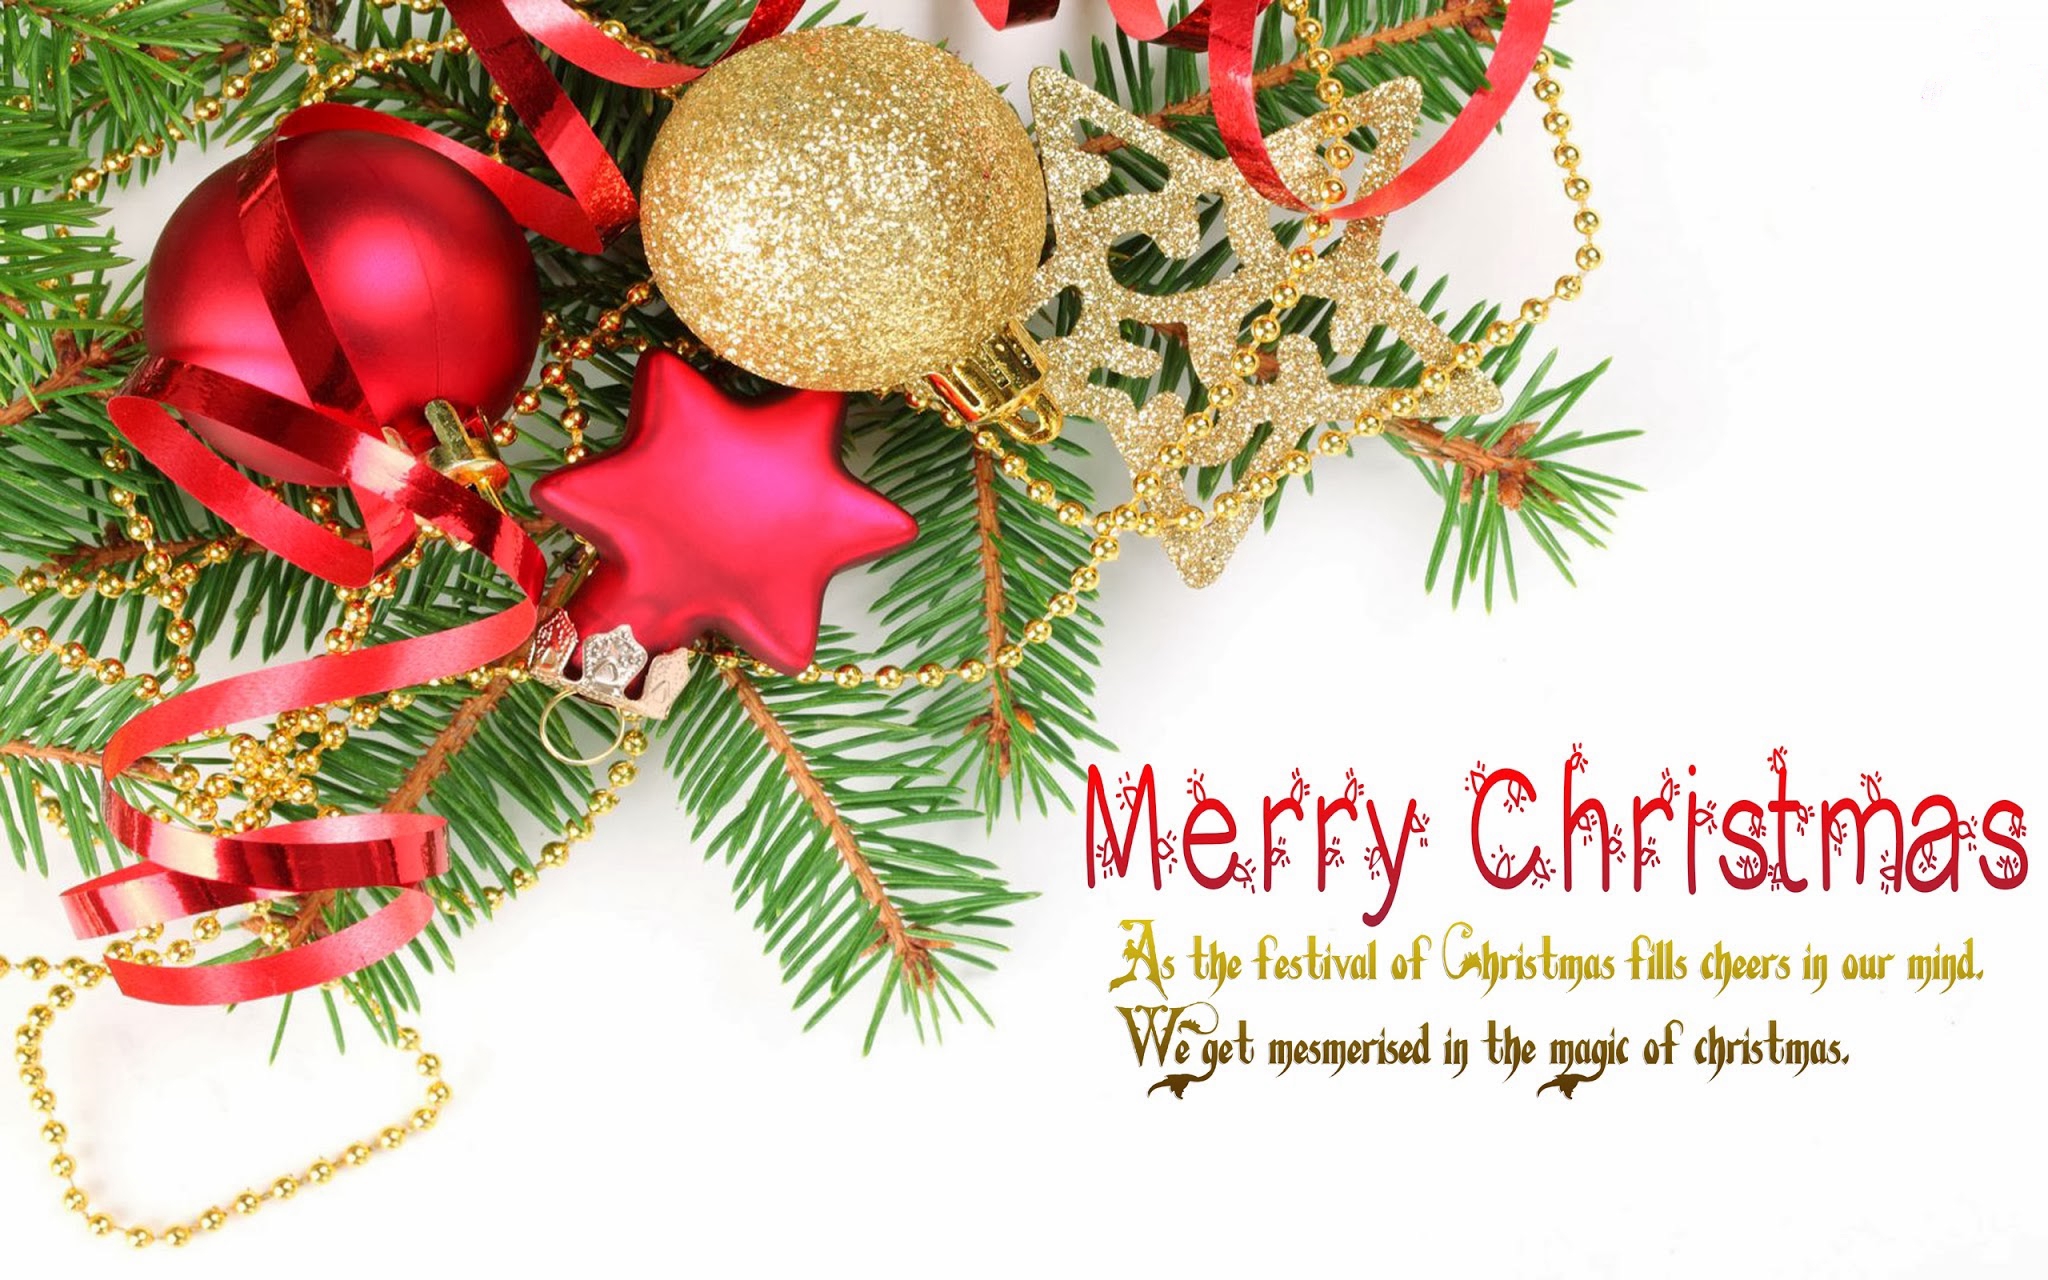 love-christmas-greetings-text-messages-ideal-christmas-greetings-greetingsforchristmas